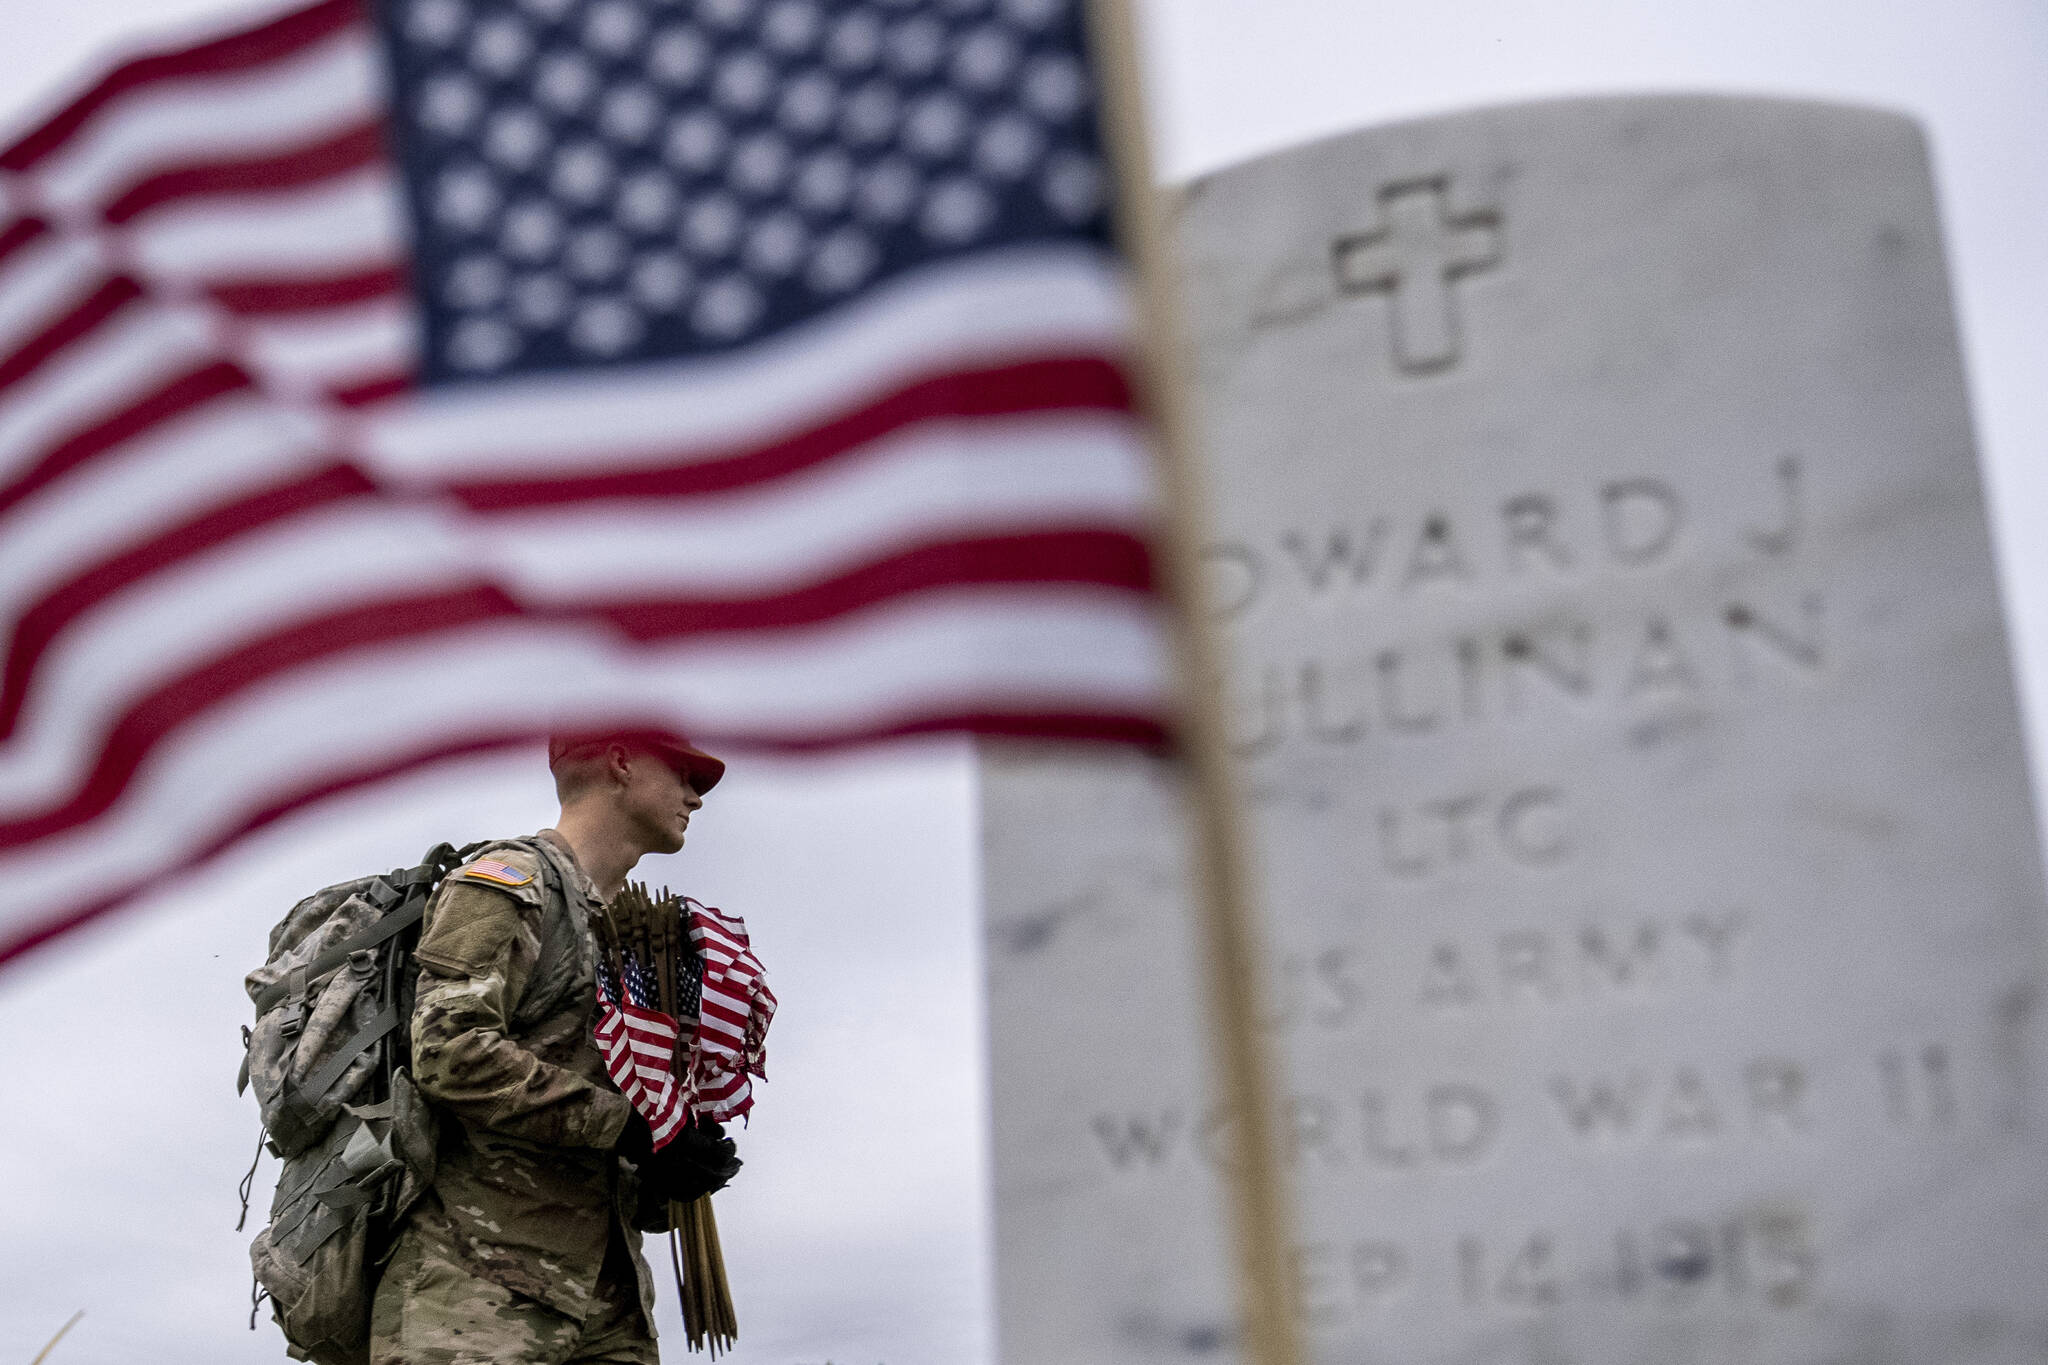 A member of the 3rd U.S. Infantry Regiment, also known as The Old Guard, places flags in front of each headstone for “Flags-In” at Arlington National Cemetery in Arlington, Thursday, May 25, 2023, to honor the Nation’s fallen military heroes ahead of Memorial Day. (AP Photo / Andrew Harnik)